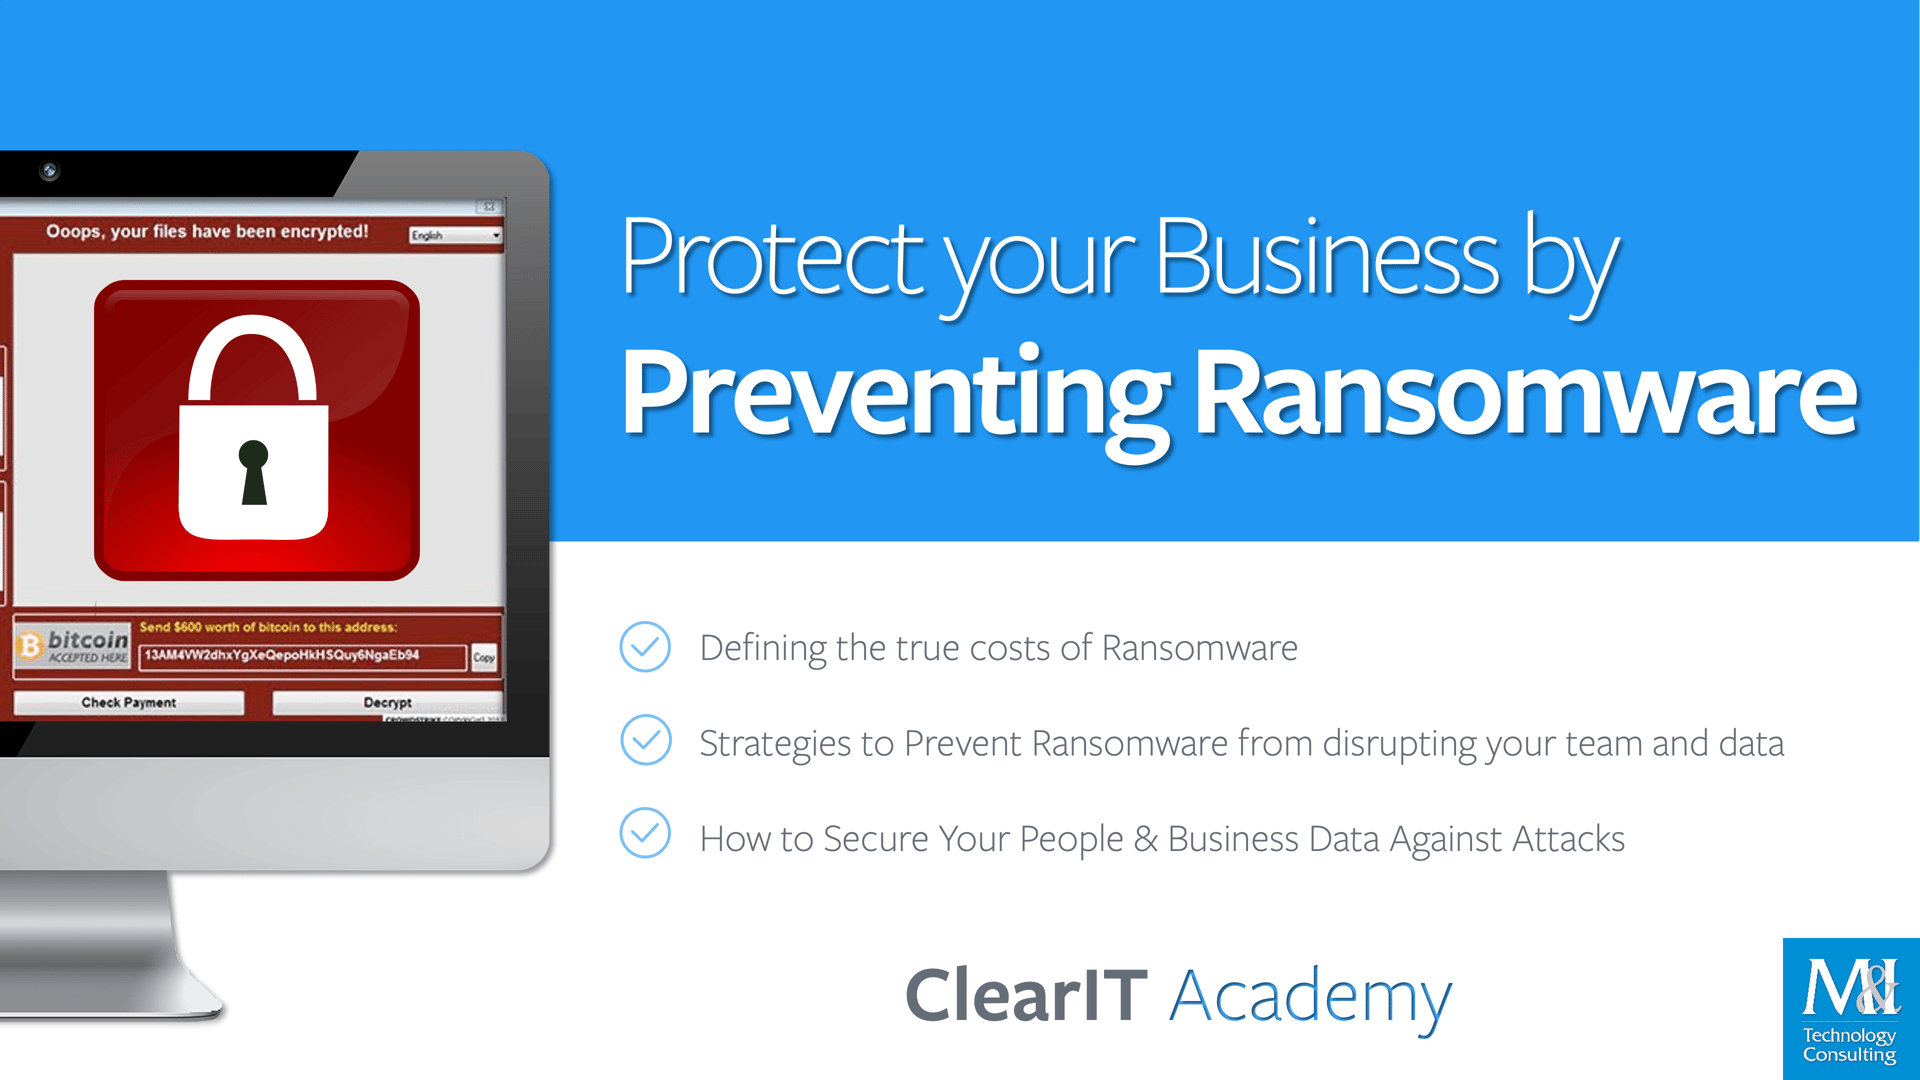 clearit-academy-protect-your-business-by-preventing-ransomware-title-slide